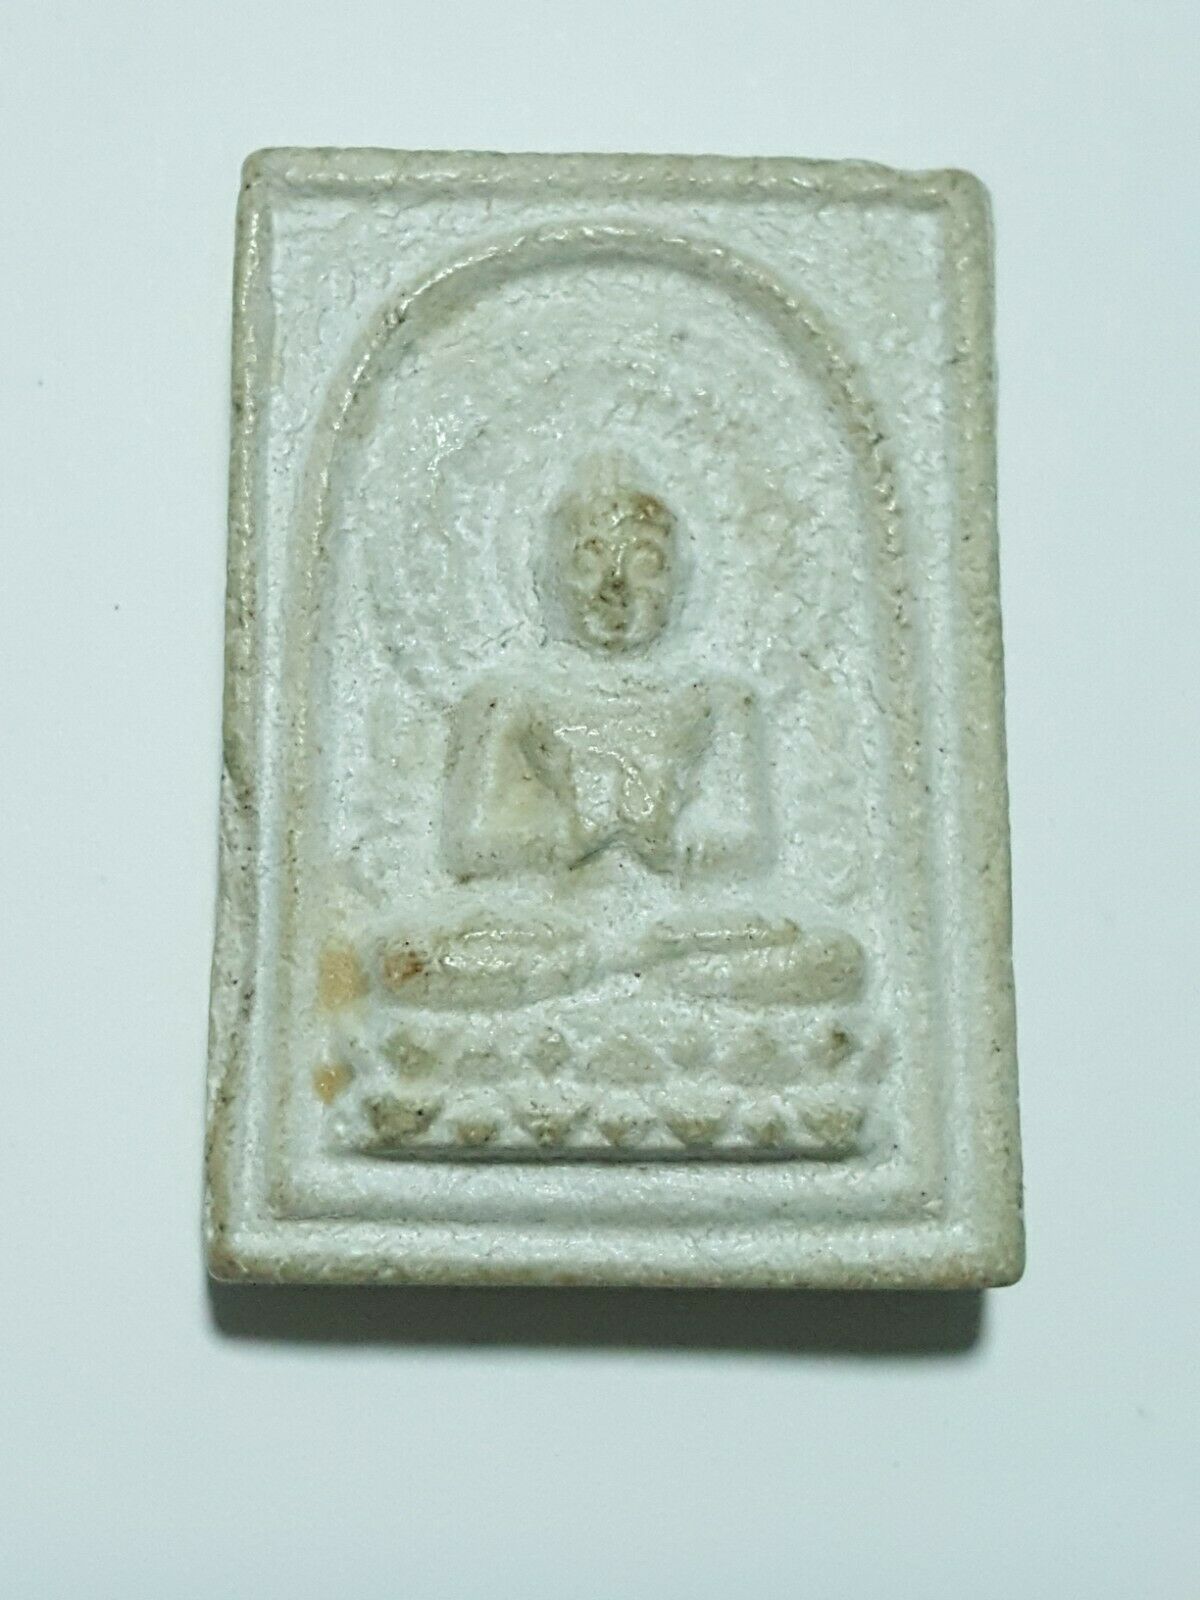 Thai Amulet Ancient Phra Somdej Unknown Place.